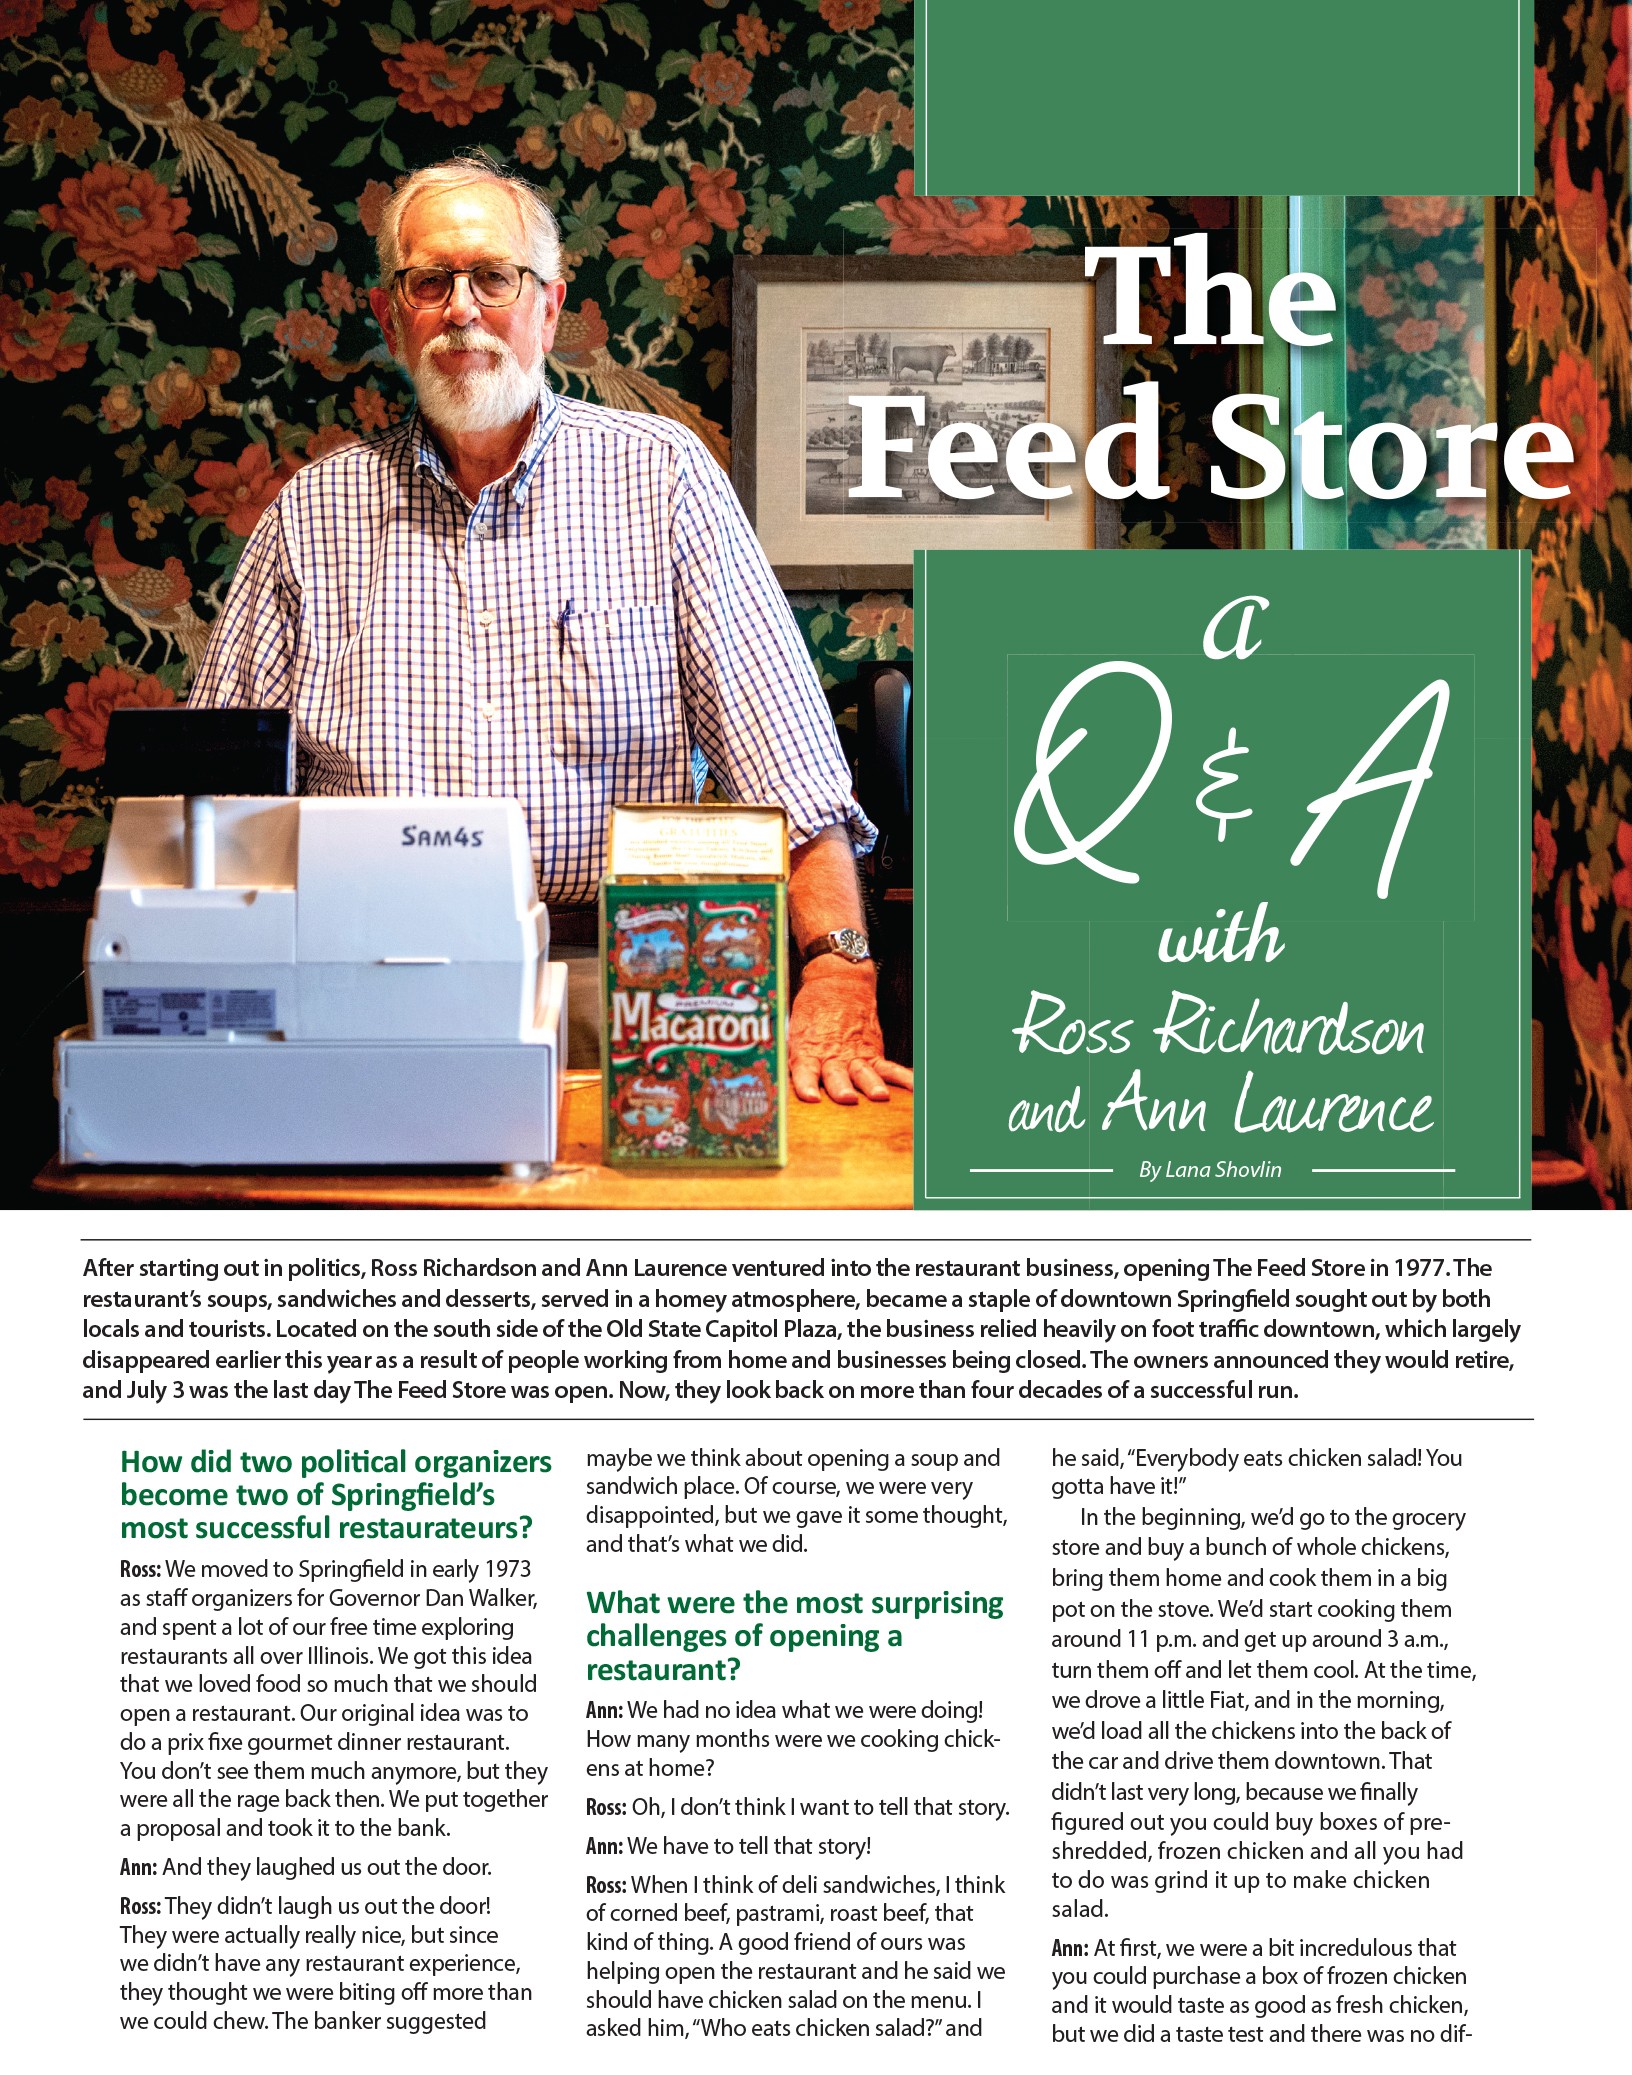 The  Feed Store - A Q&A with Ross Richardson and Ann Laurence